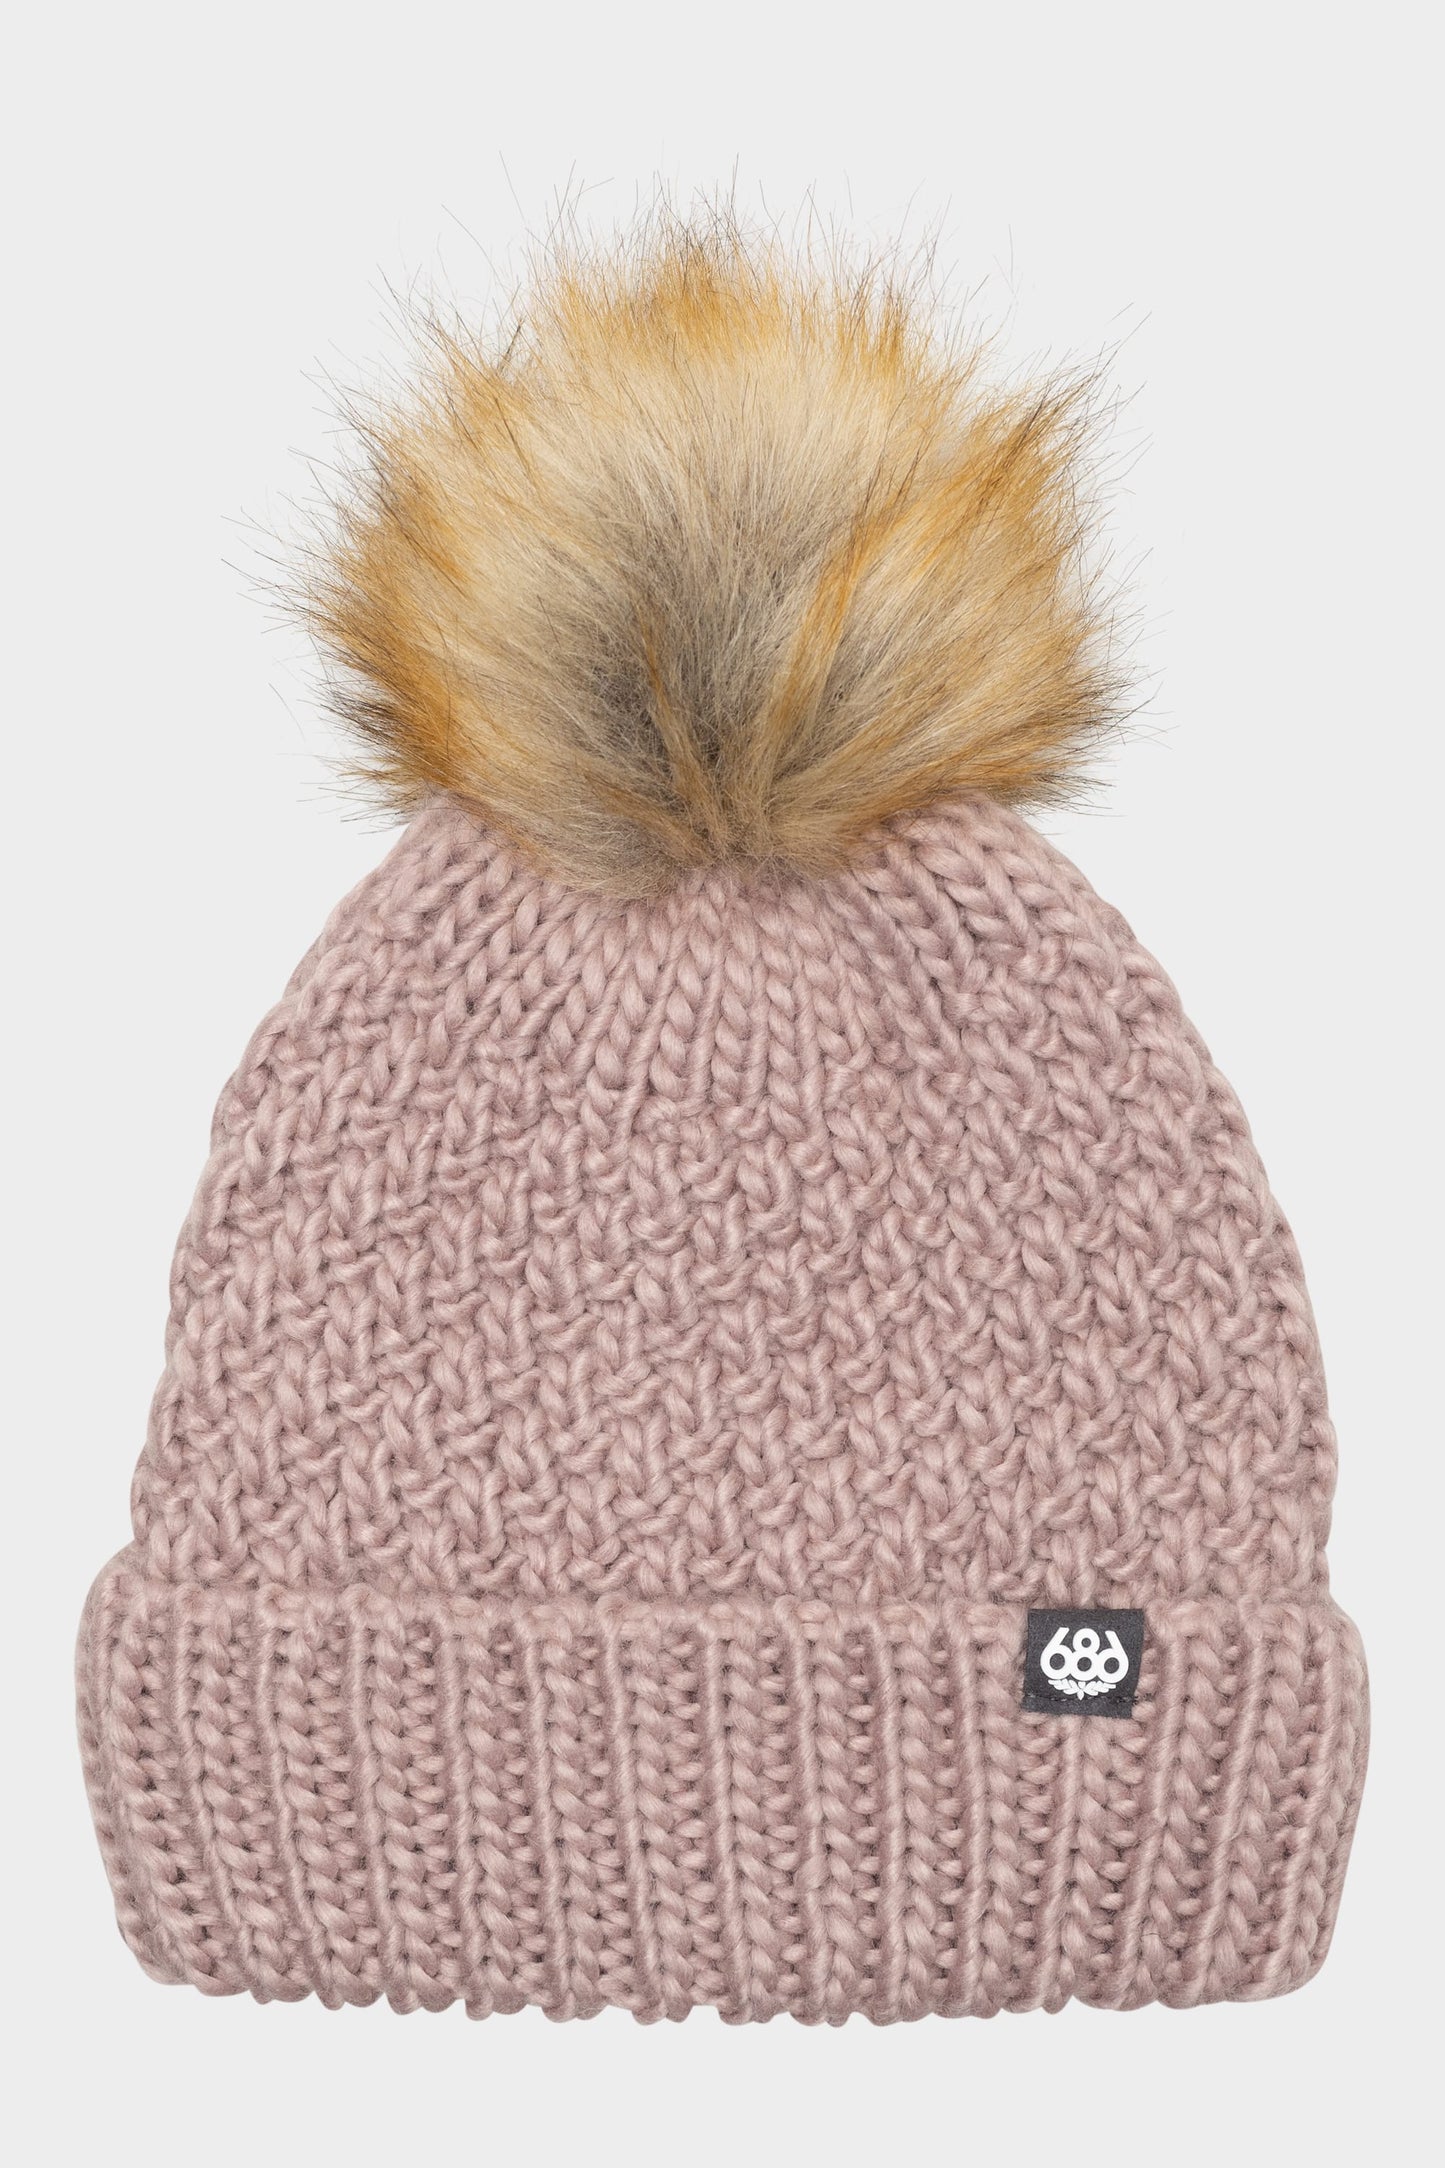 686 Women's Majesty Cable Knit Beanie